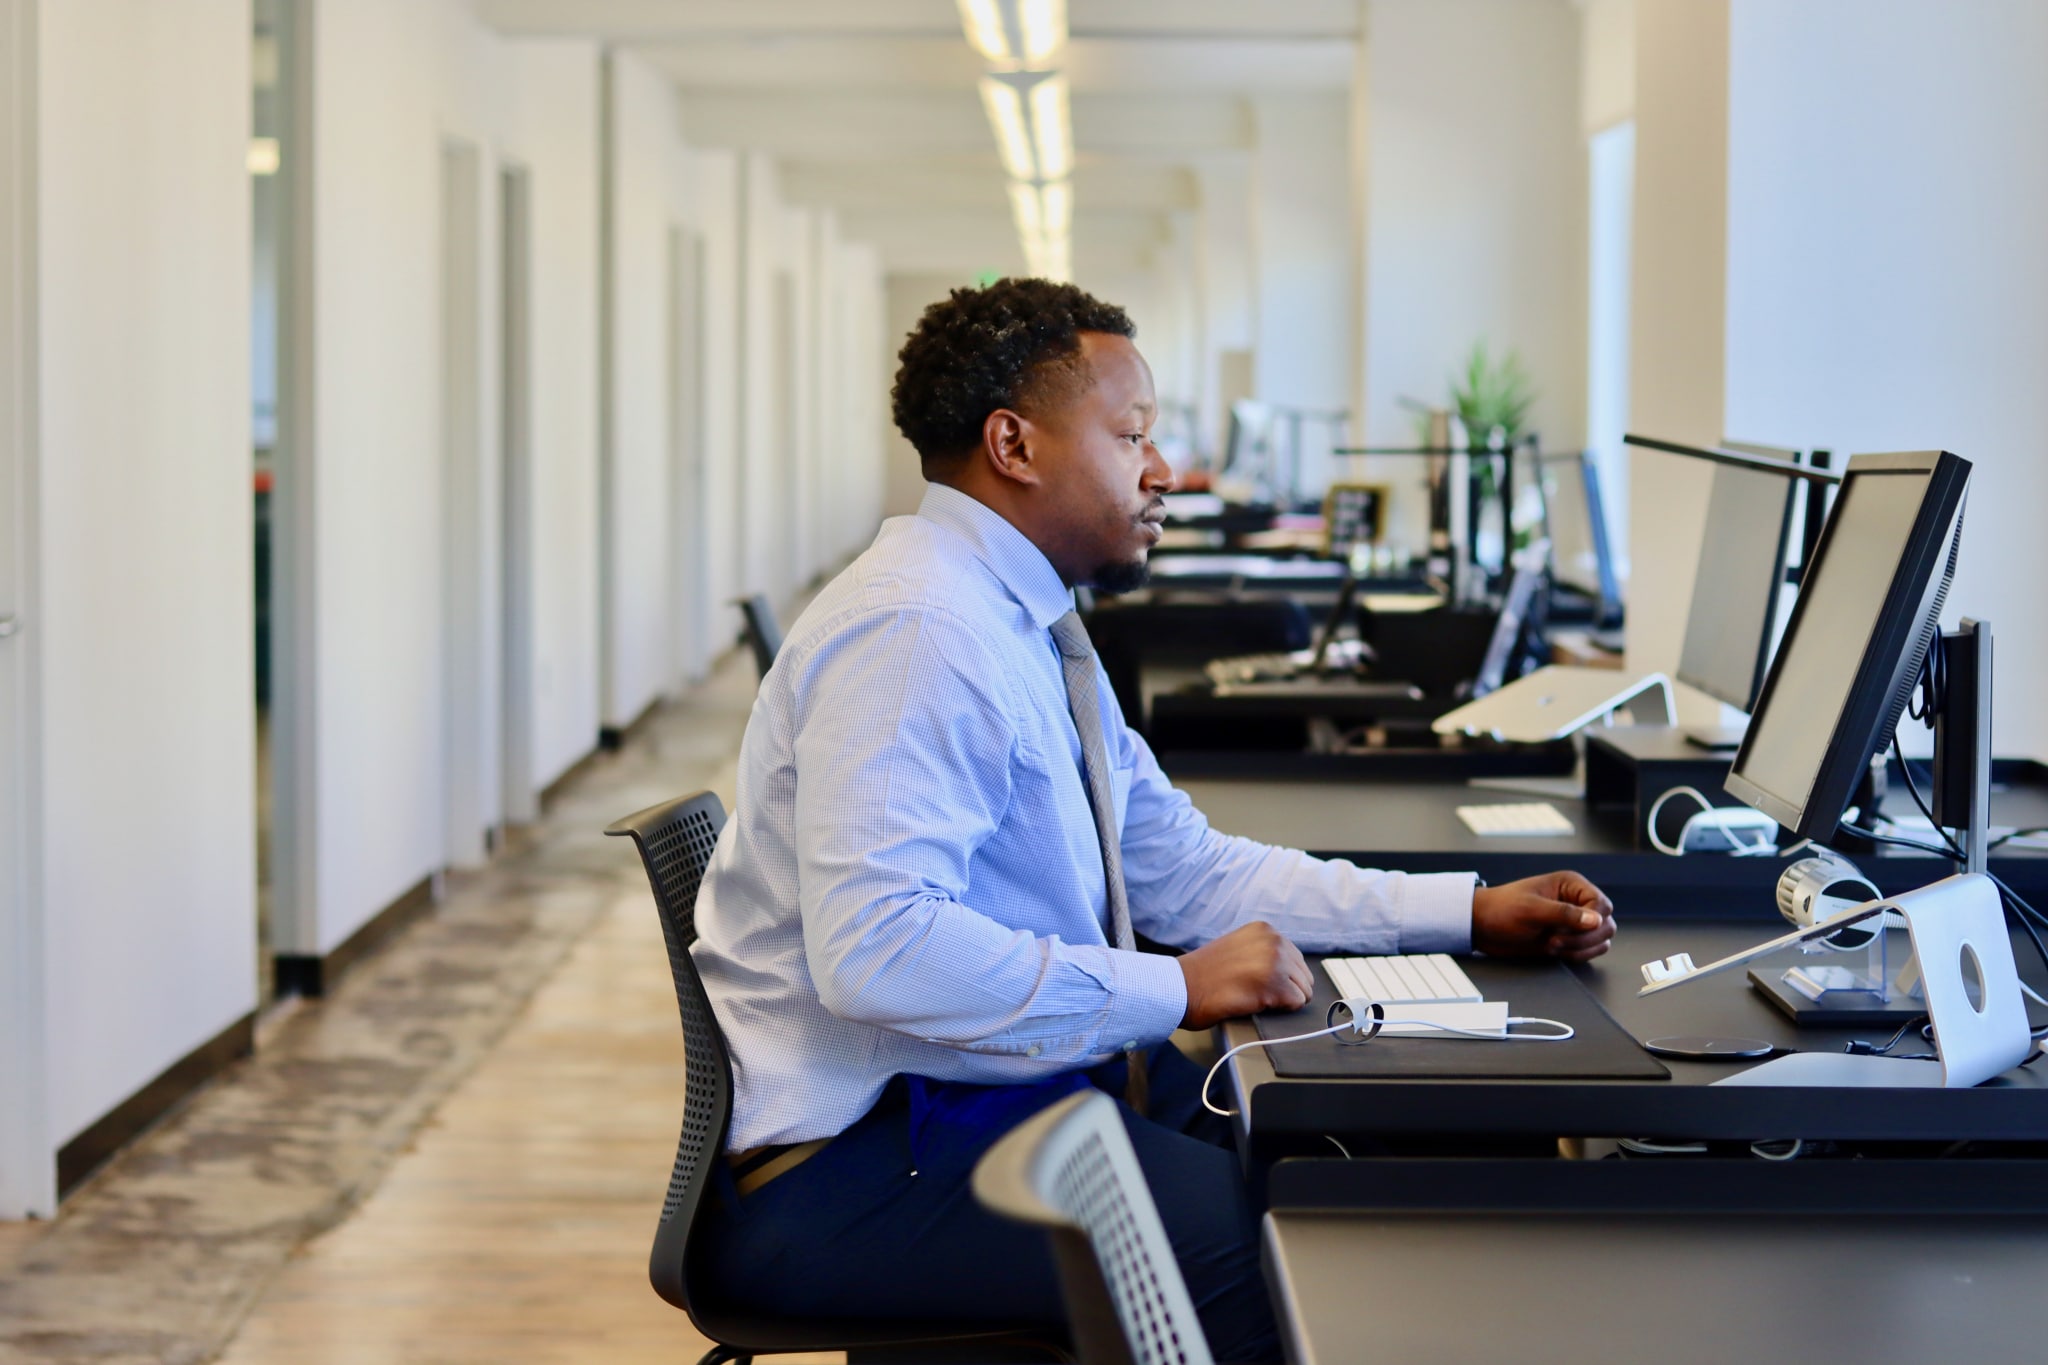 Stanley Stevenson, with his newfound full-time entrepreneur status, will soon upgrade his nights and weekend package with Forge to the 24/7 access package, so he's able to work from the downtown co-working space anytime.